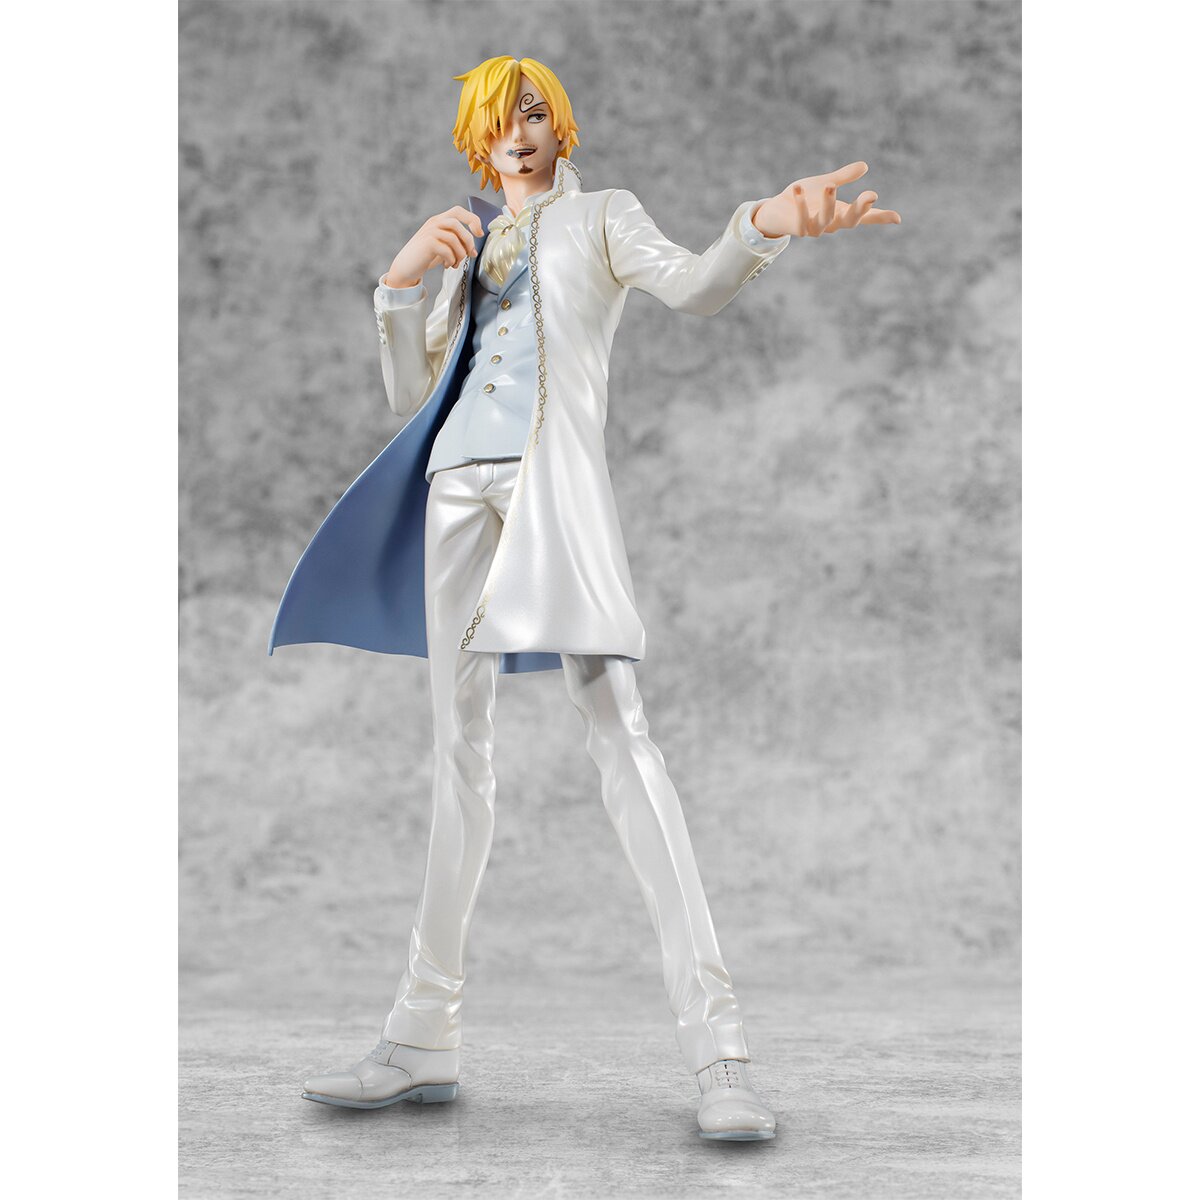 Portrait of Pirates One Piece Sanji Ver. WD Limited Edition